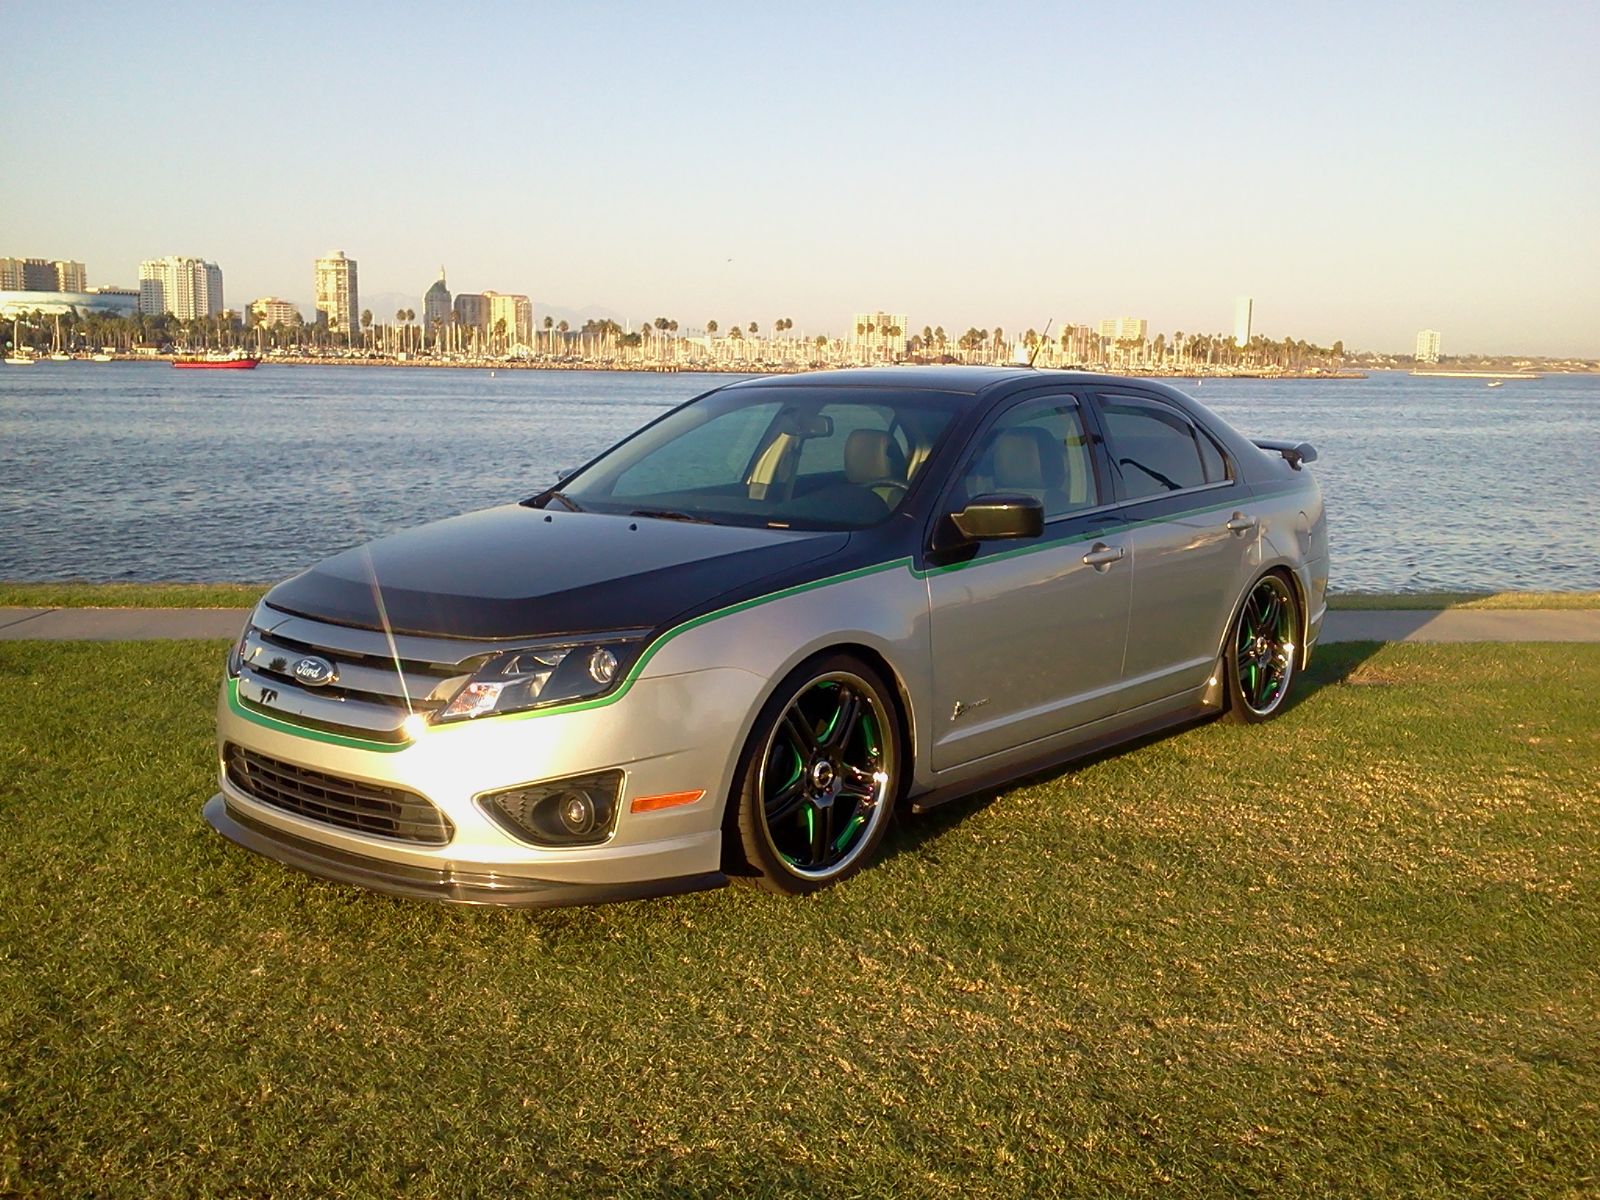 2012 Ford fusion aftermarket wheels #4